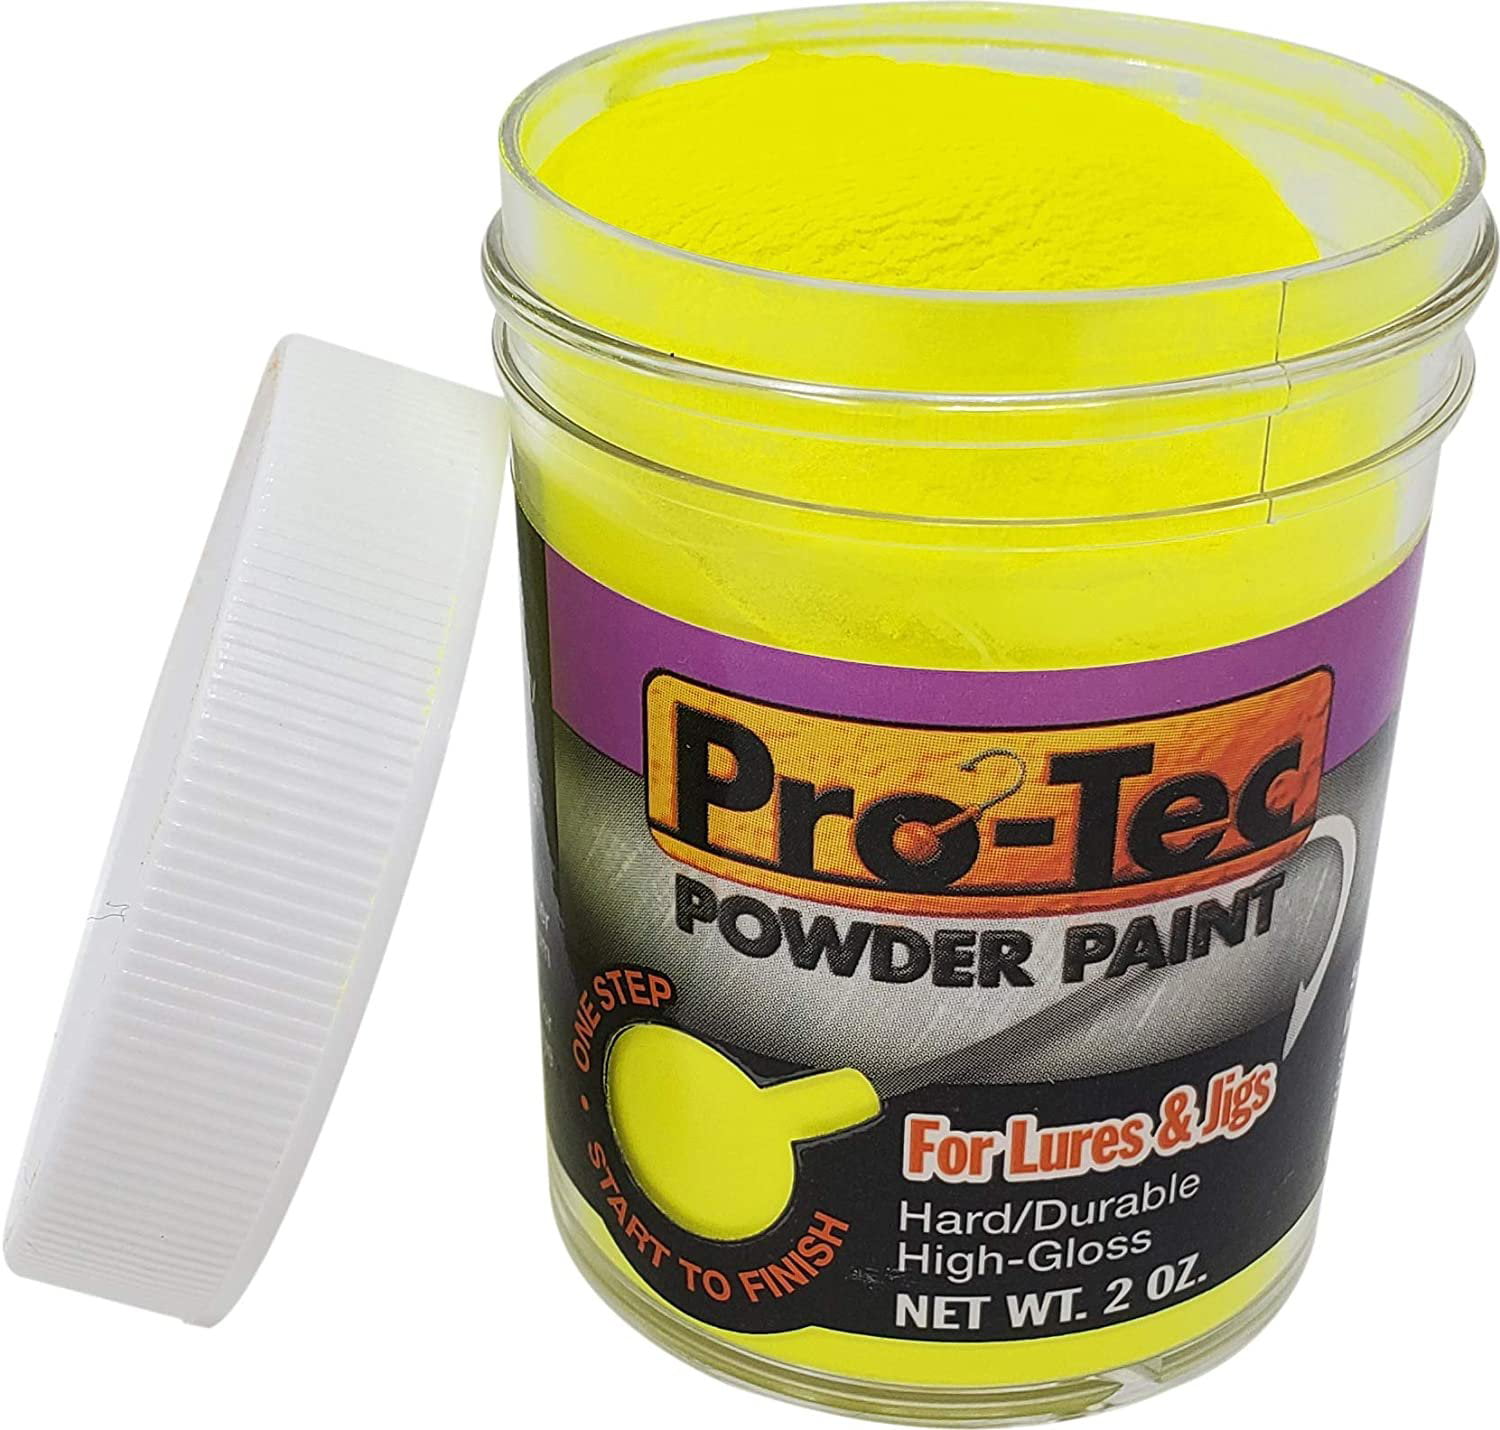  One Pound Can of Pro-Tec Lure Powder Paint, Cheaper by